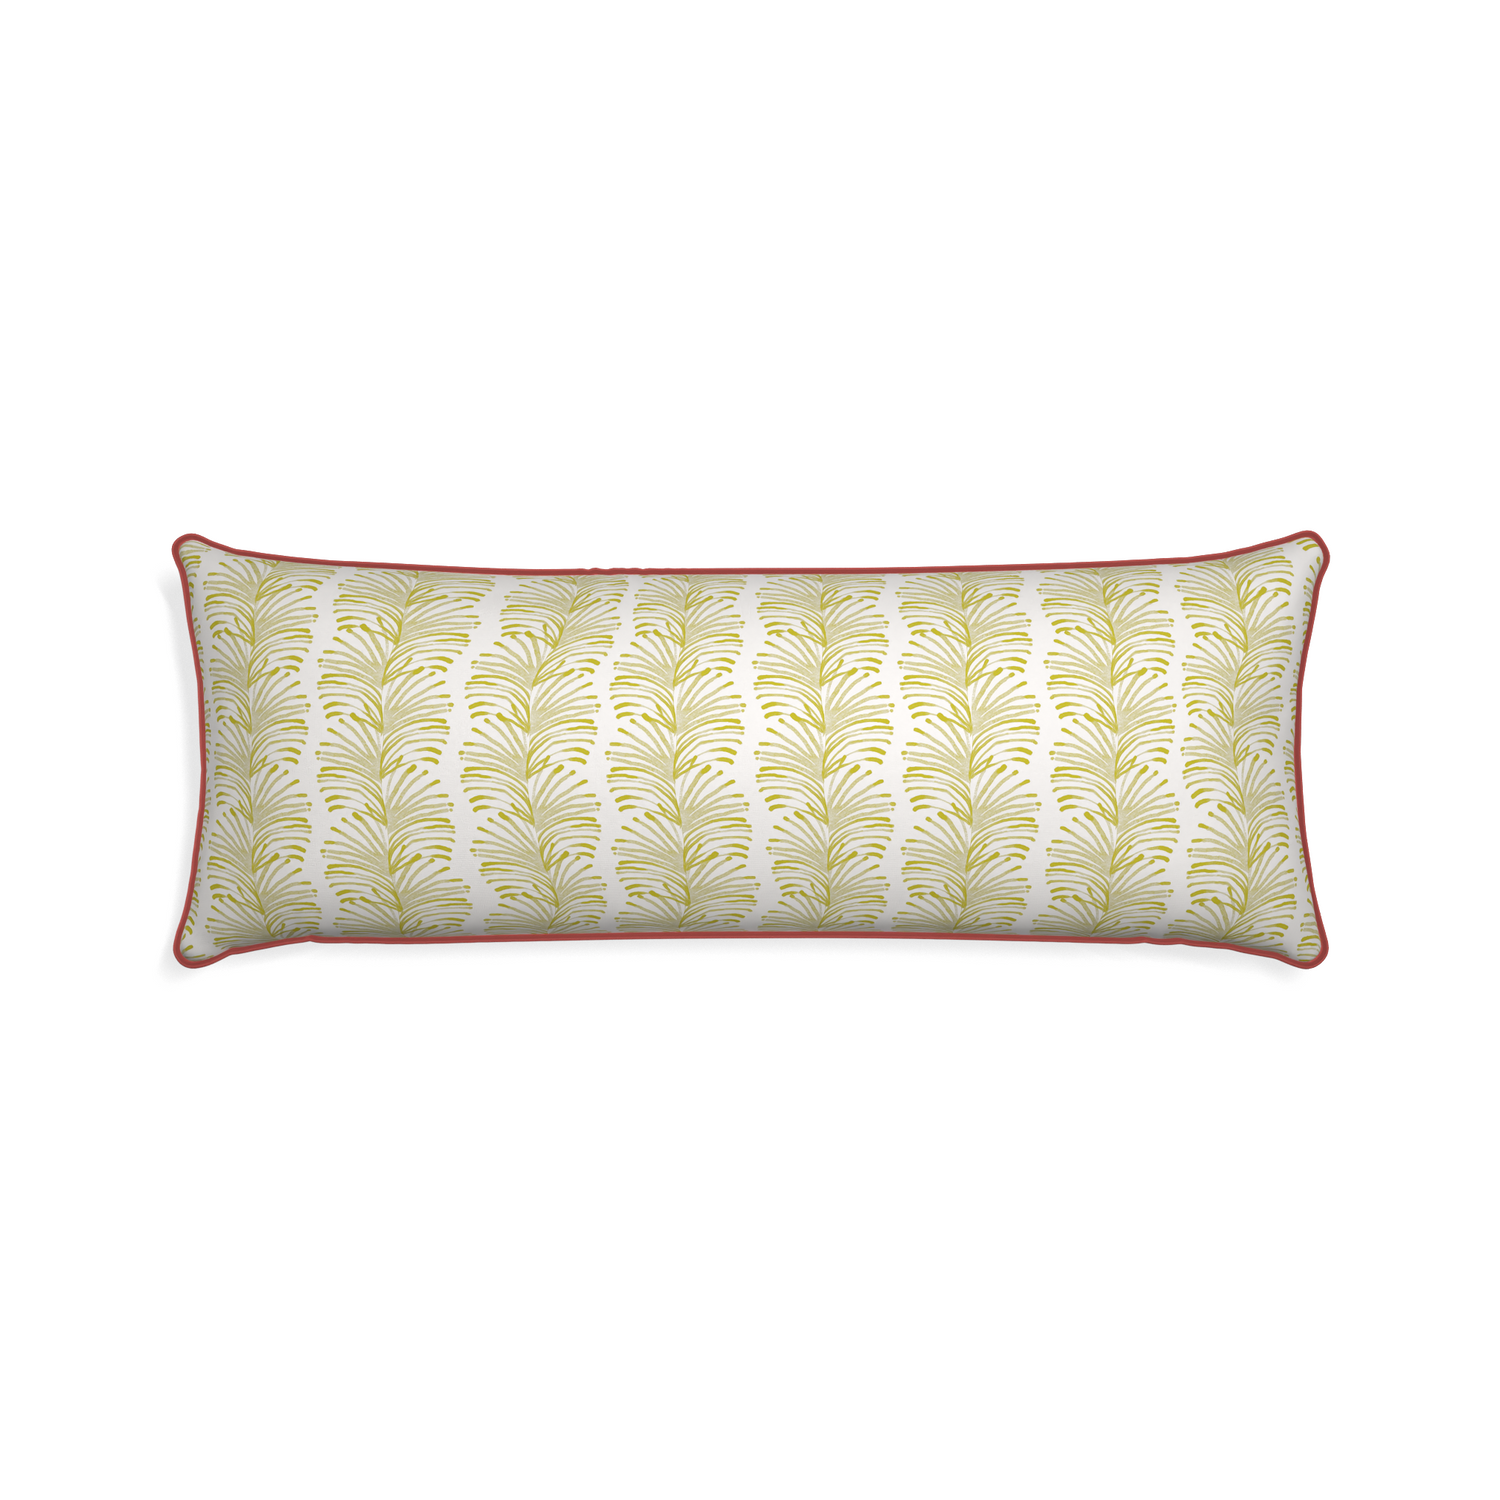 Xl-lumbar emma chartreuse custom yellow stripe chartreusepillow with c piping on white background